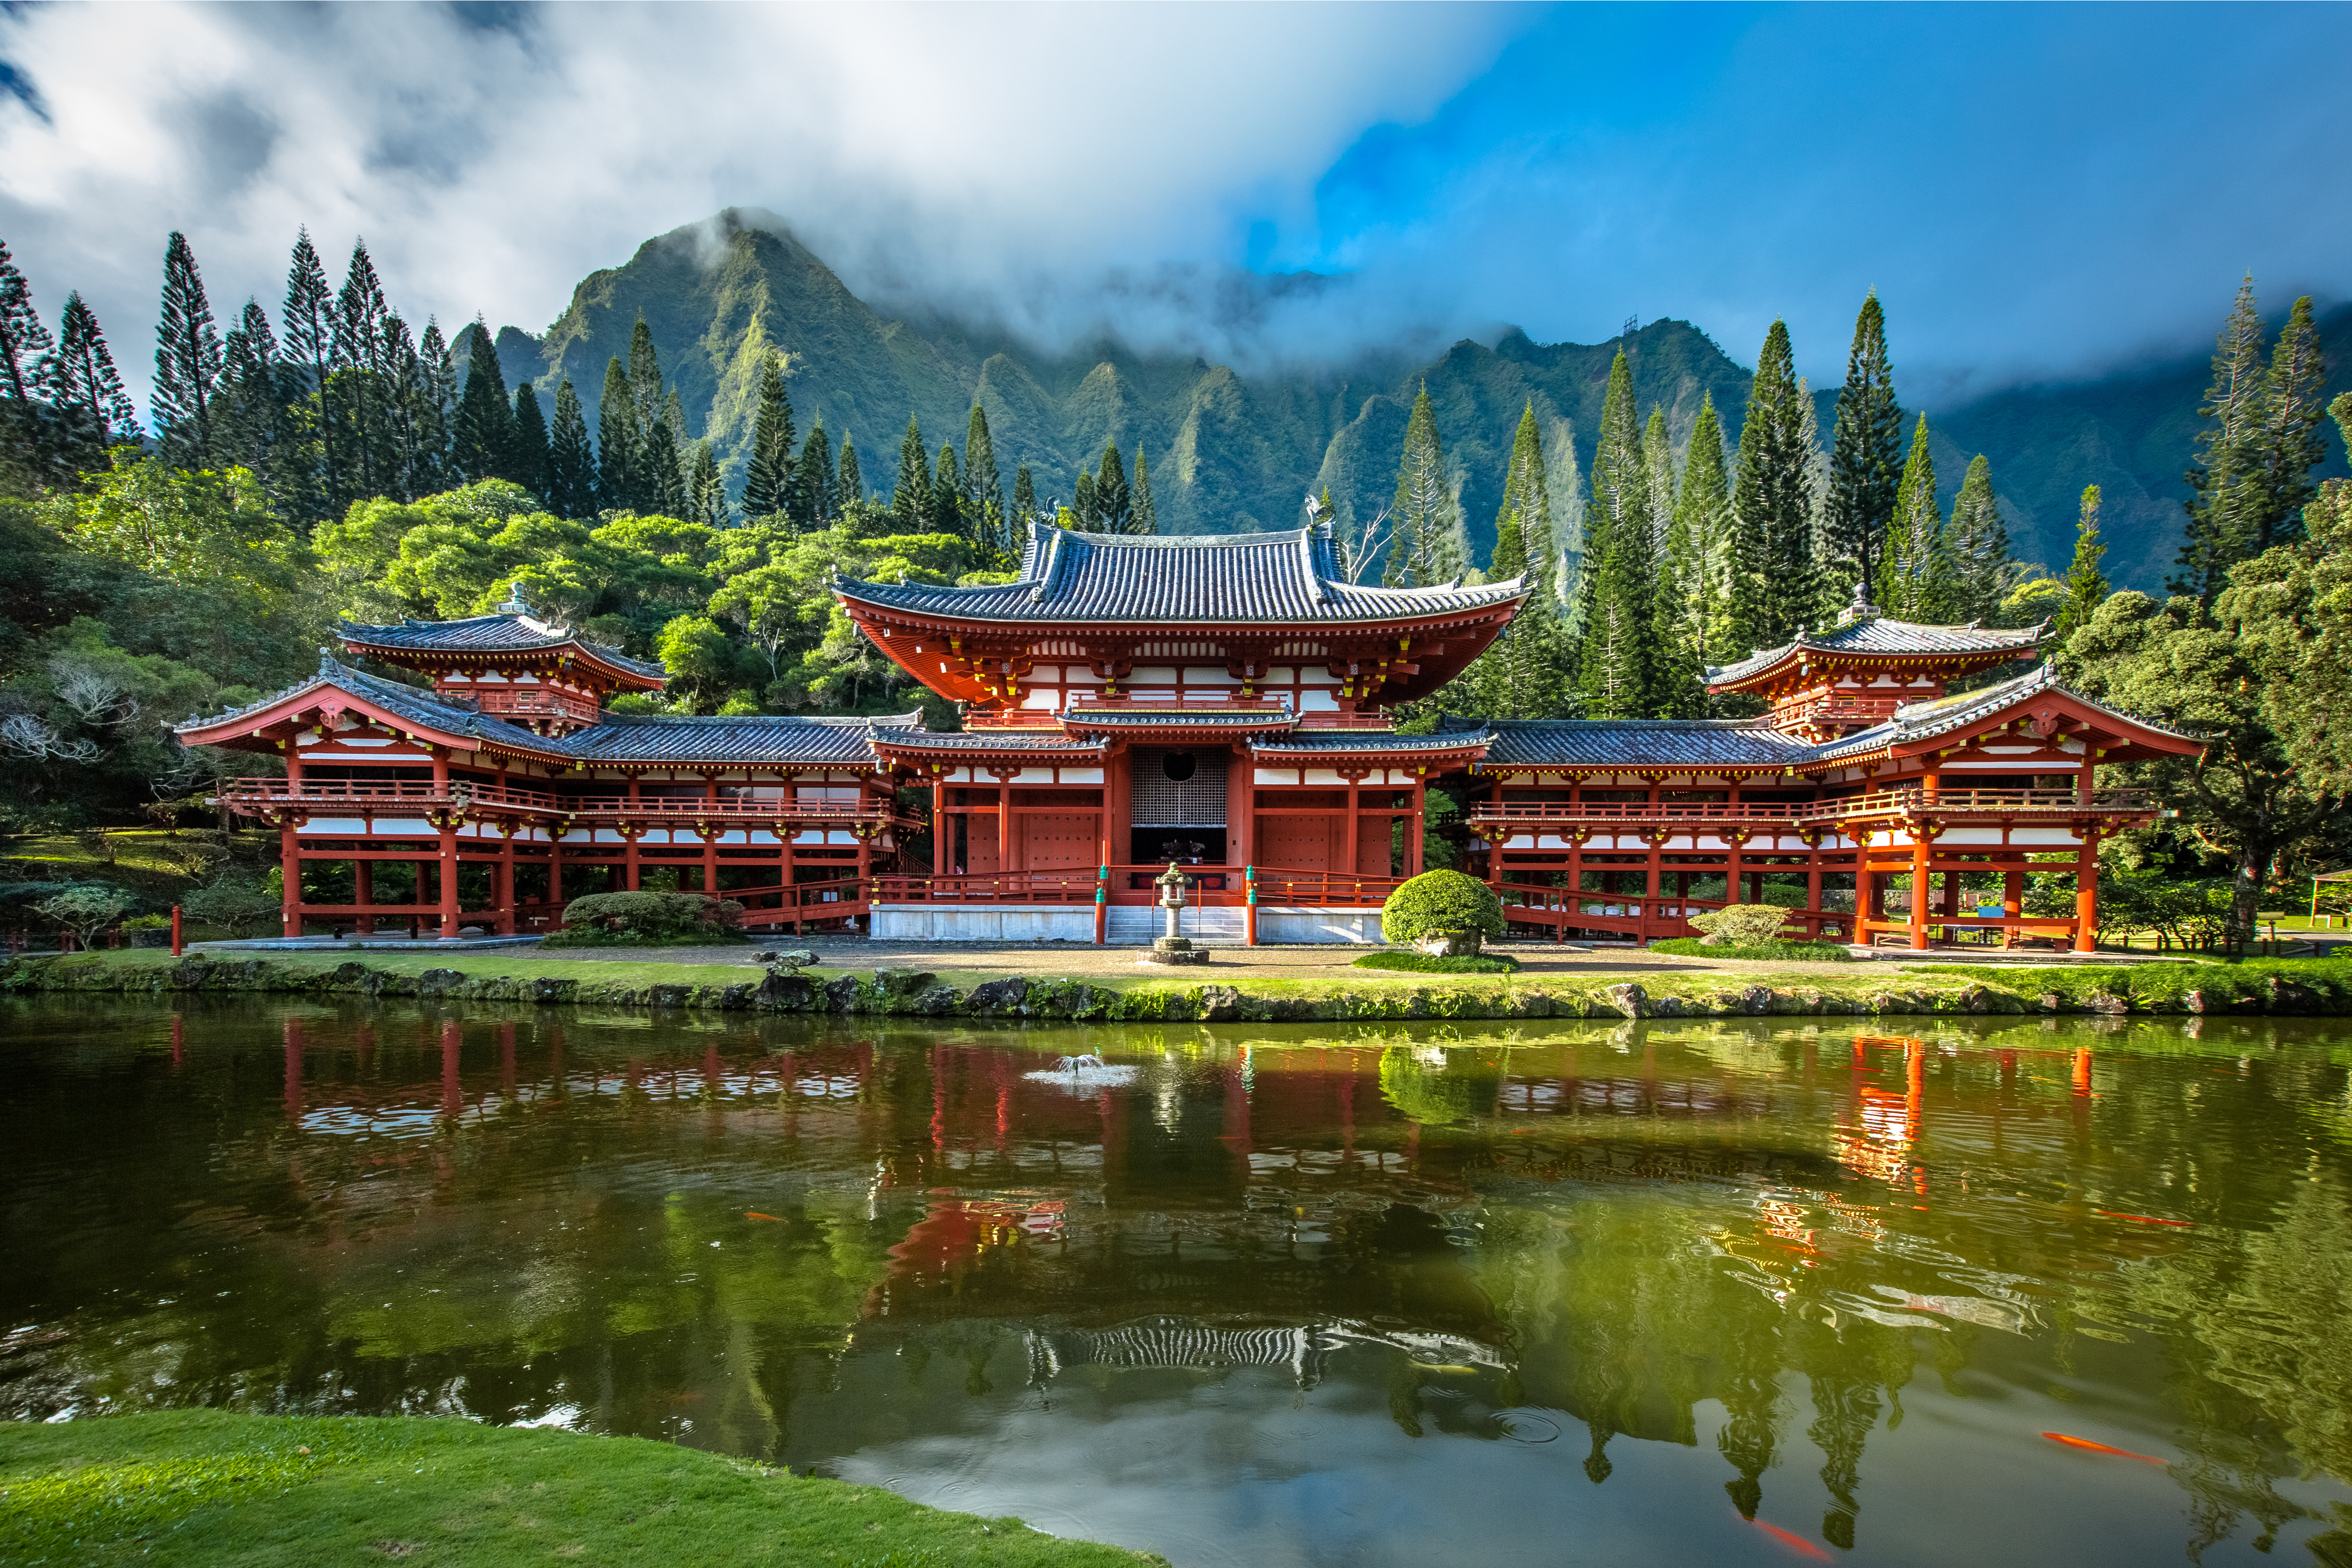 The Byodo-In Temple in Valley of the Temples reflected on its algae-infested ponds with relaxing scenery of misty peak mountains, meditating here is among the best things to do in Oahu